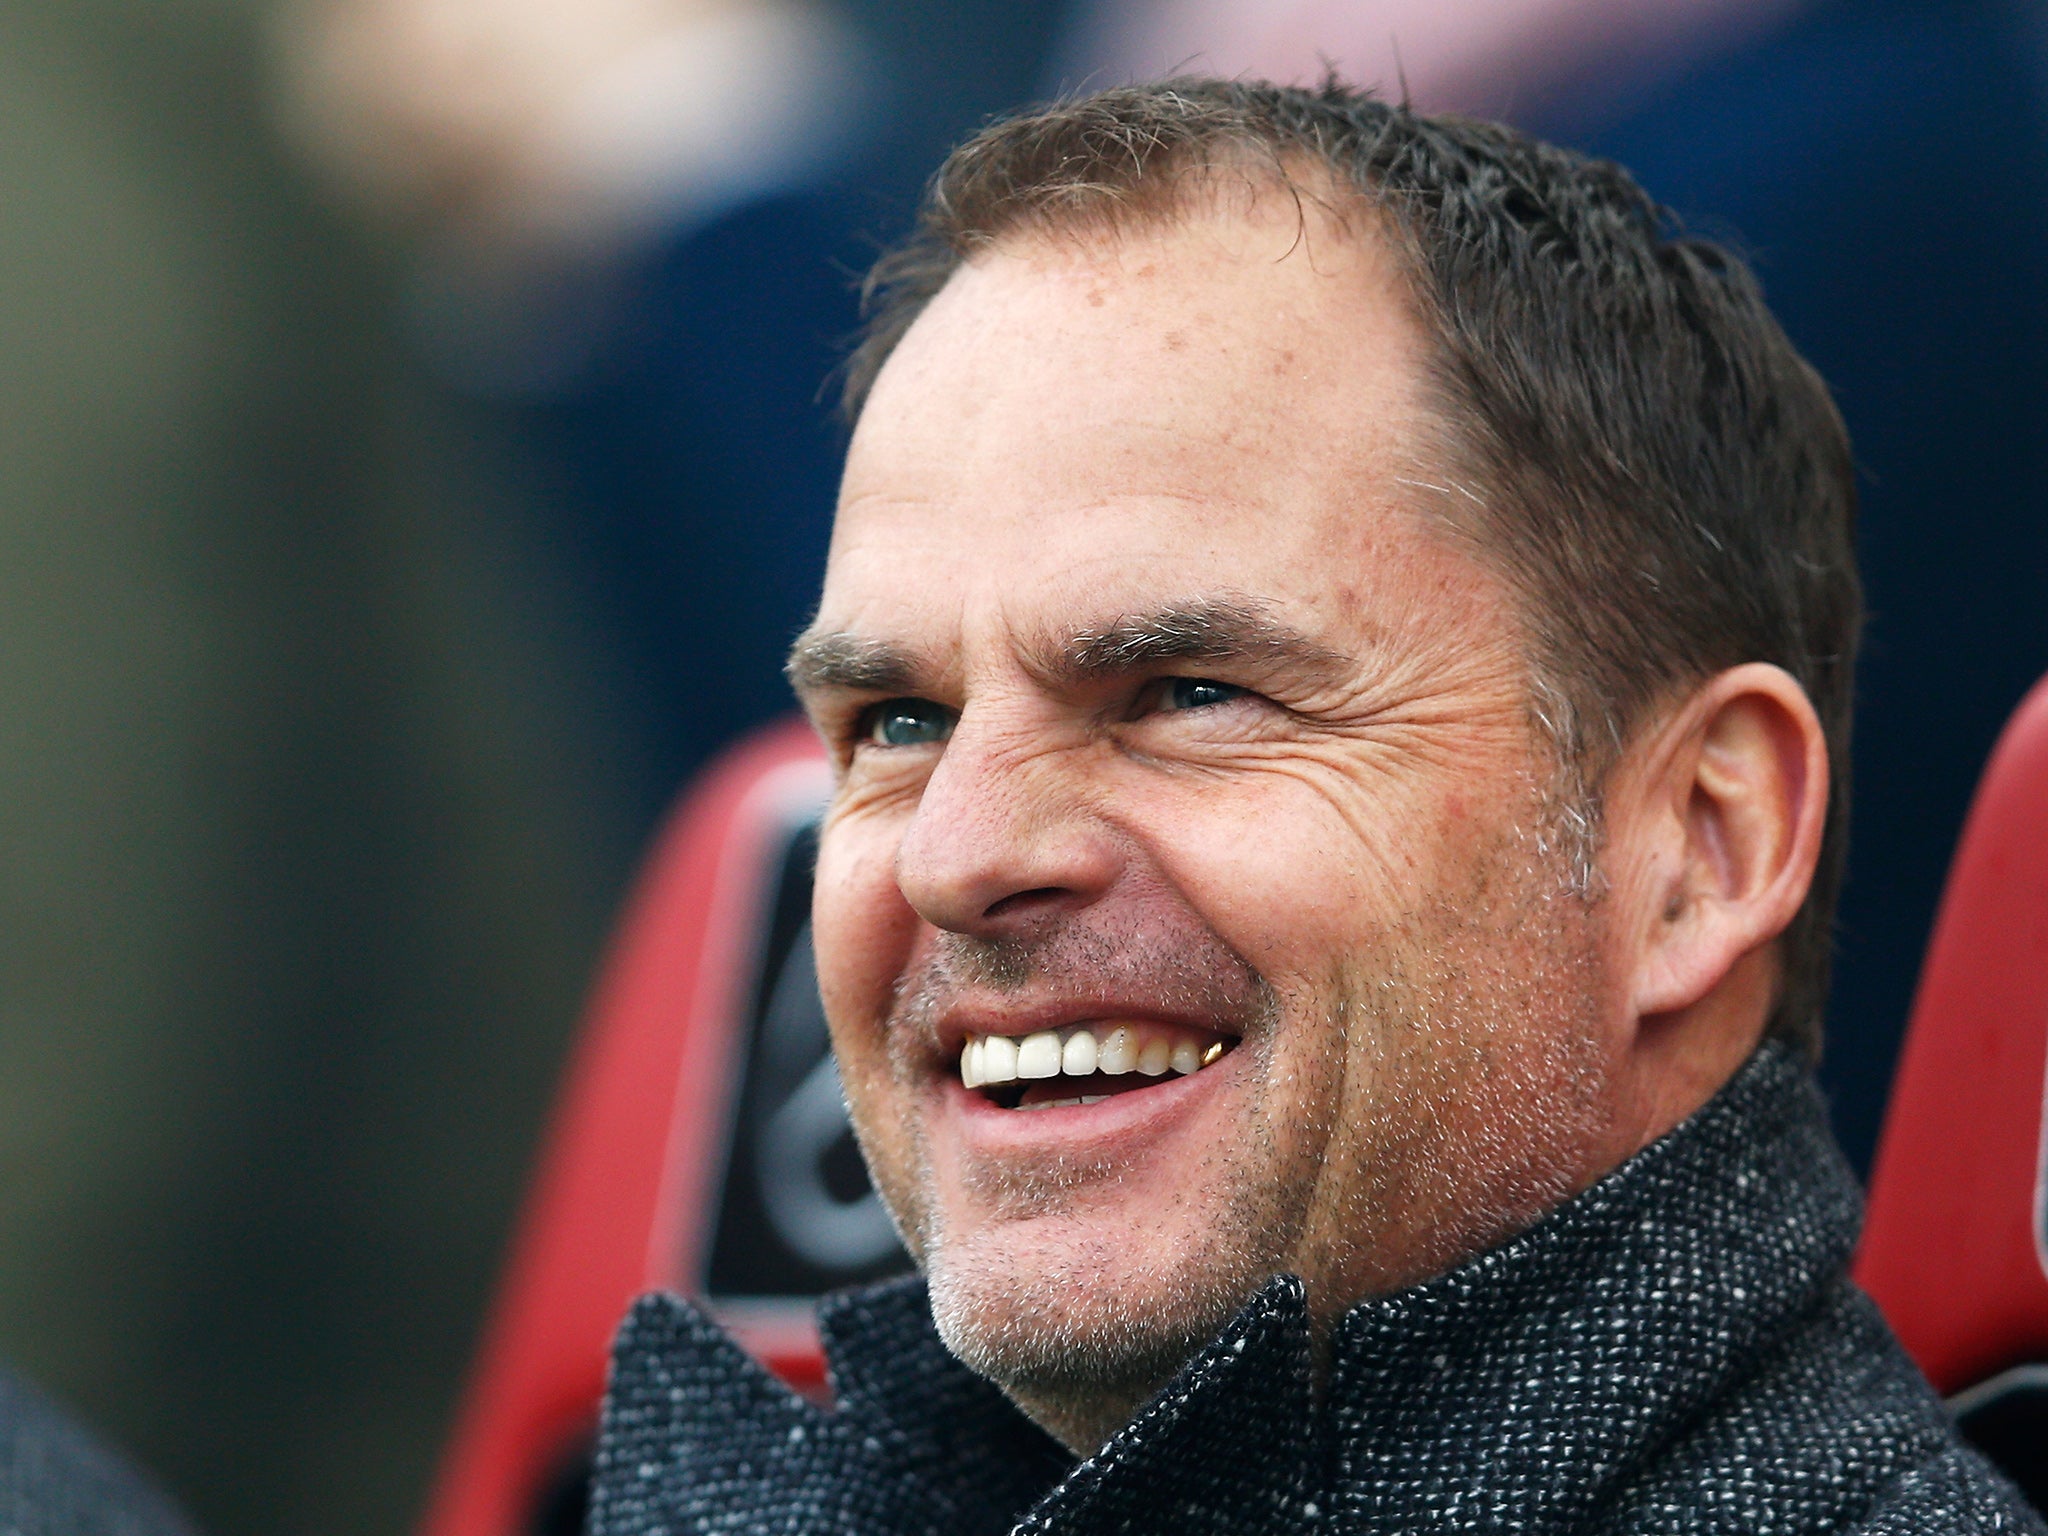 Frank De Boer will look to rehabilitate his reputation after a wild but brief spell with Inter